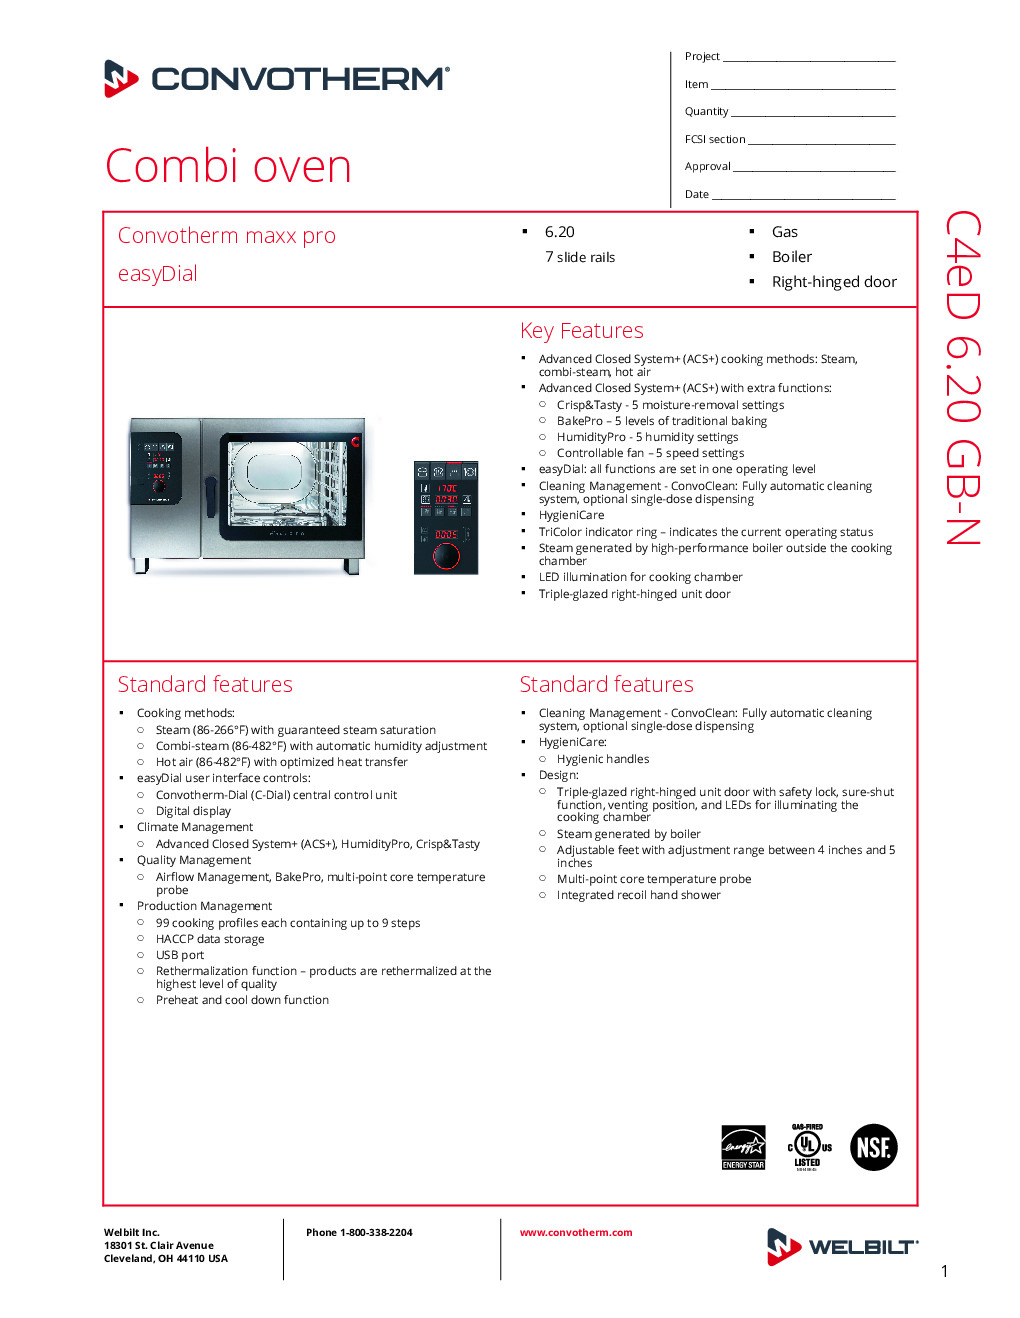 Convotherm C4 ED 6.20GB-N Full Size Gas Combi Oven with easyDial Controls